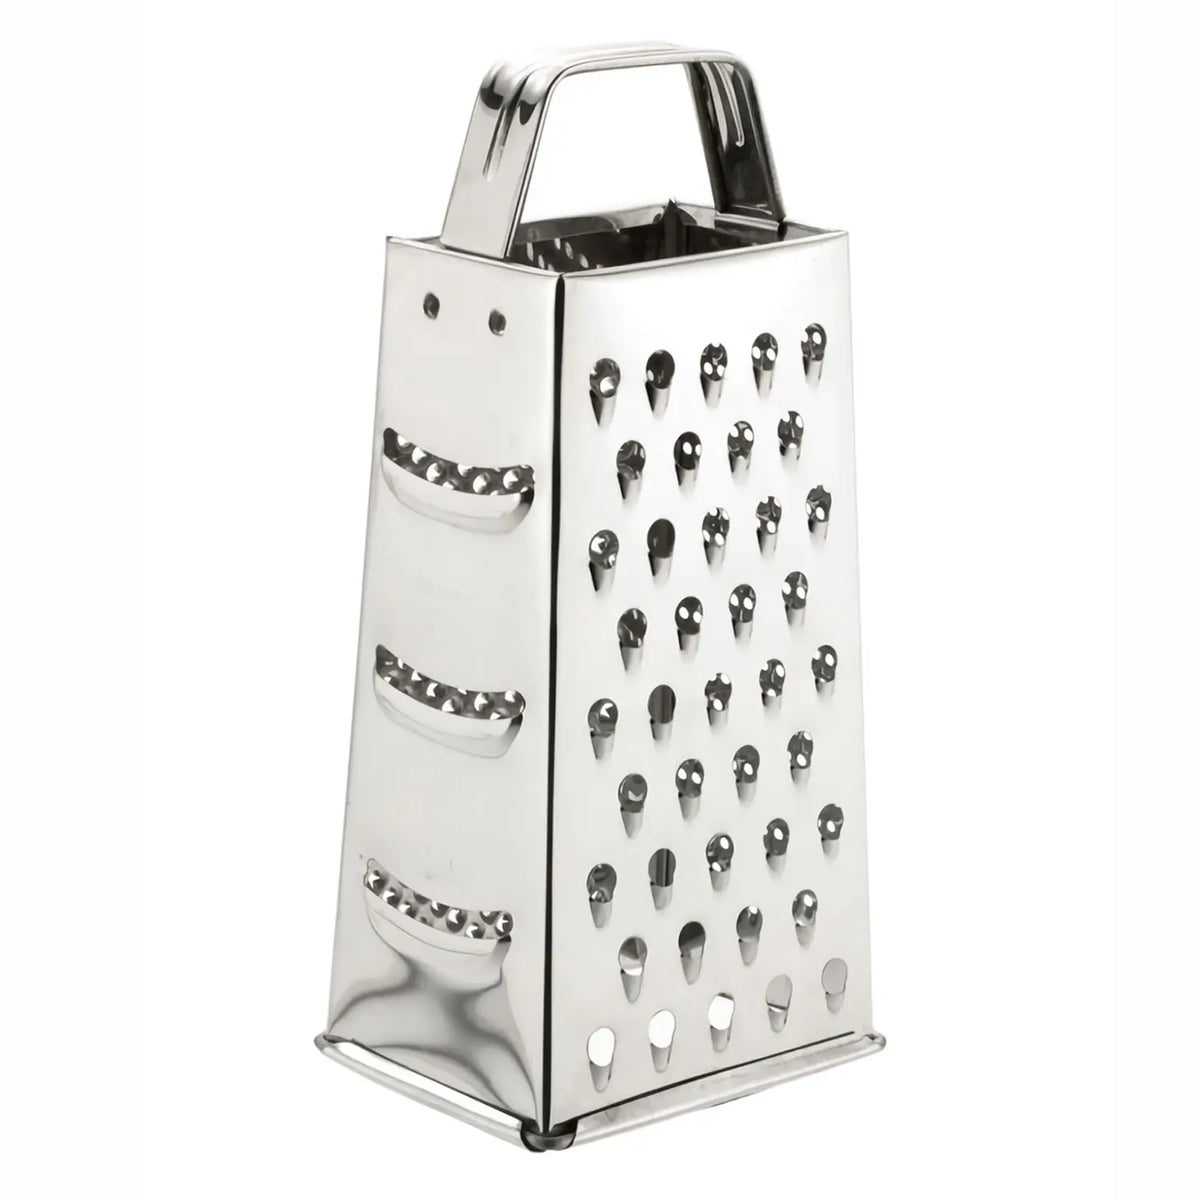 4-SIDED STAINLESS STEEL GRATER - PURCHASE OF KITCHEN UTENSILS